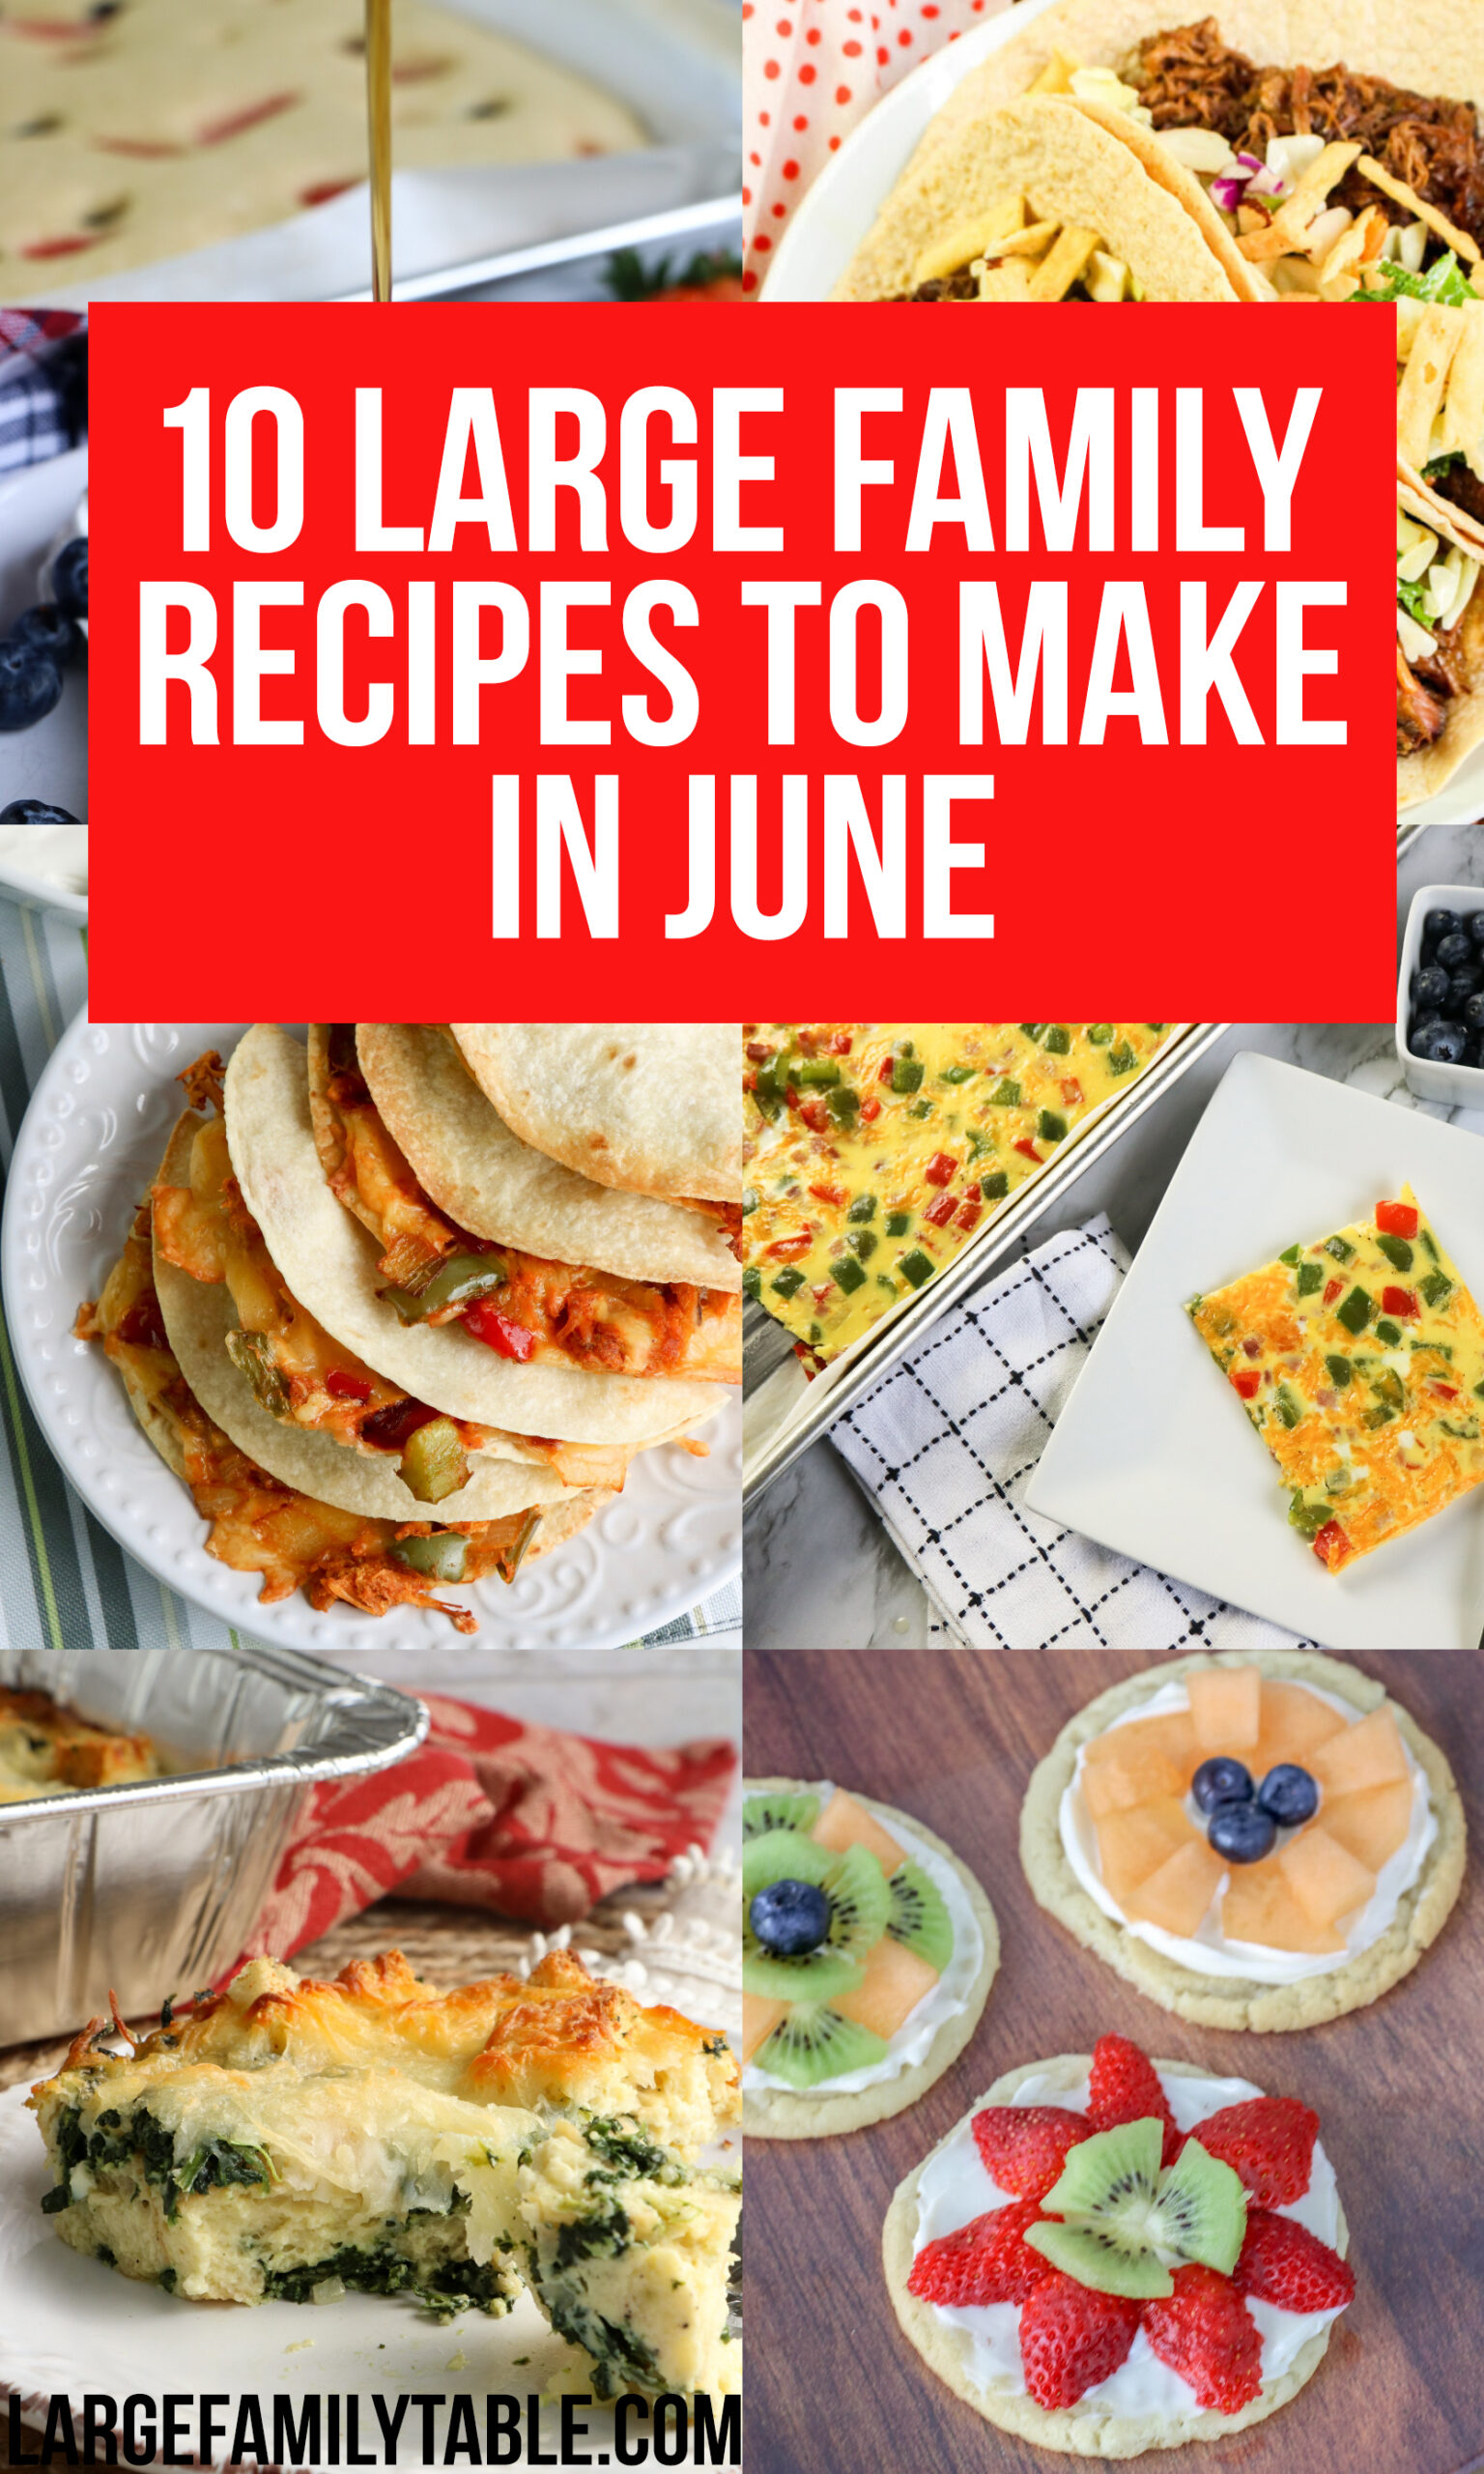 10-Large-Family-Recipes-to-Make-in-June